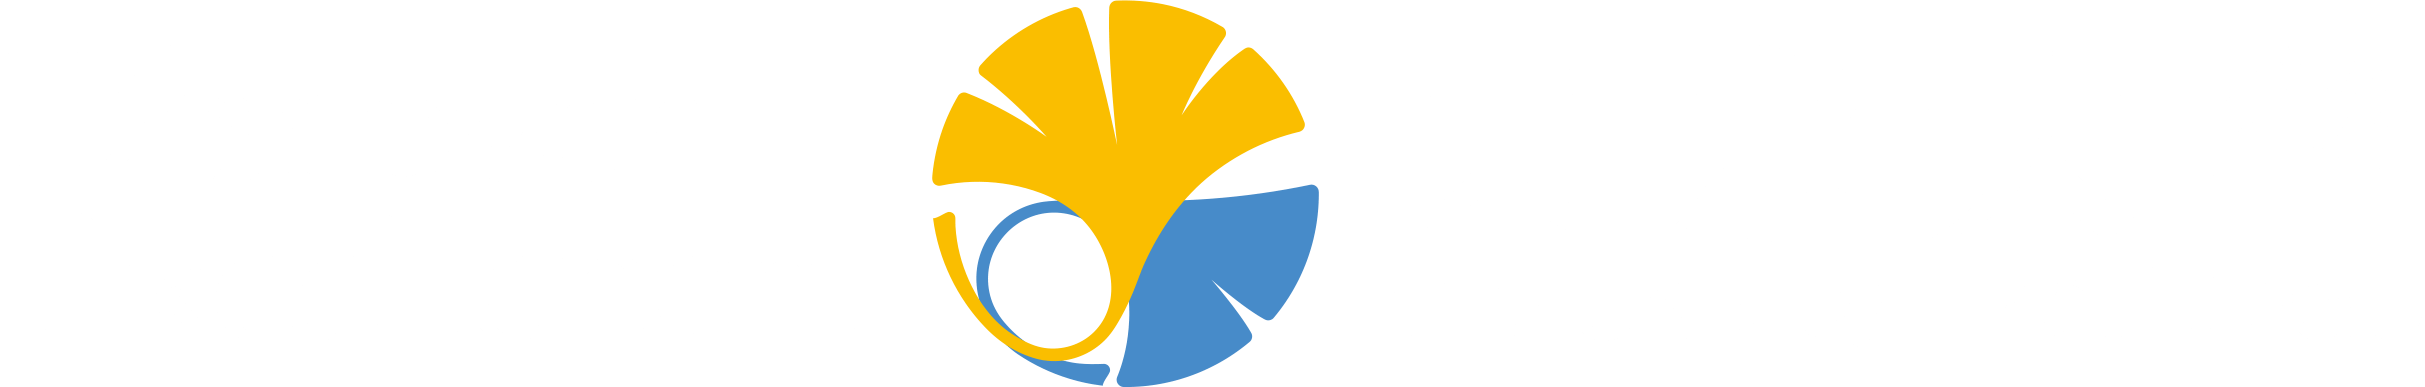 Yellow Blue Research University Logo - Research | The University of Tokyo